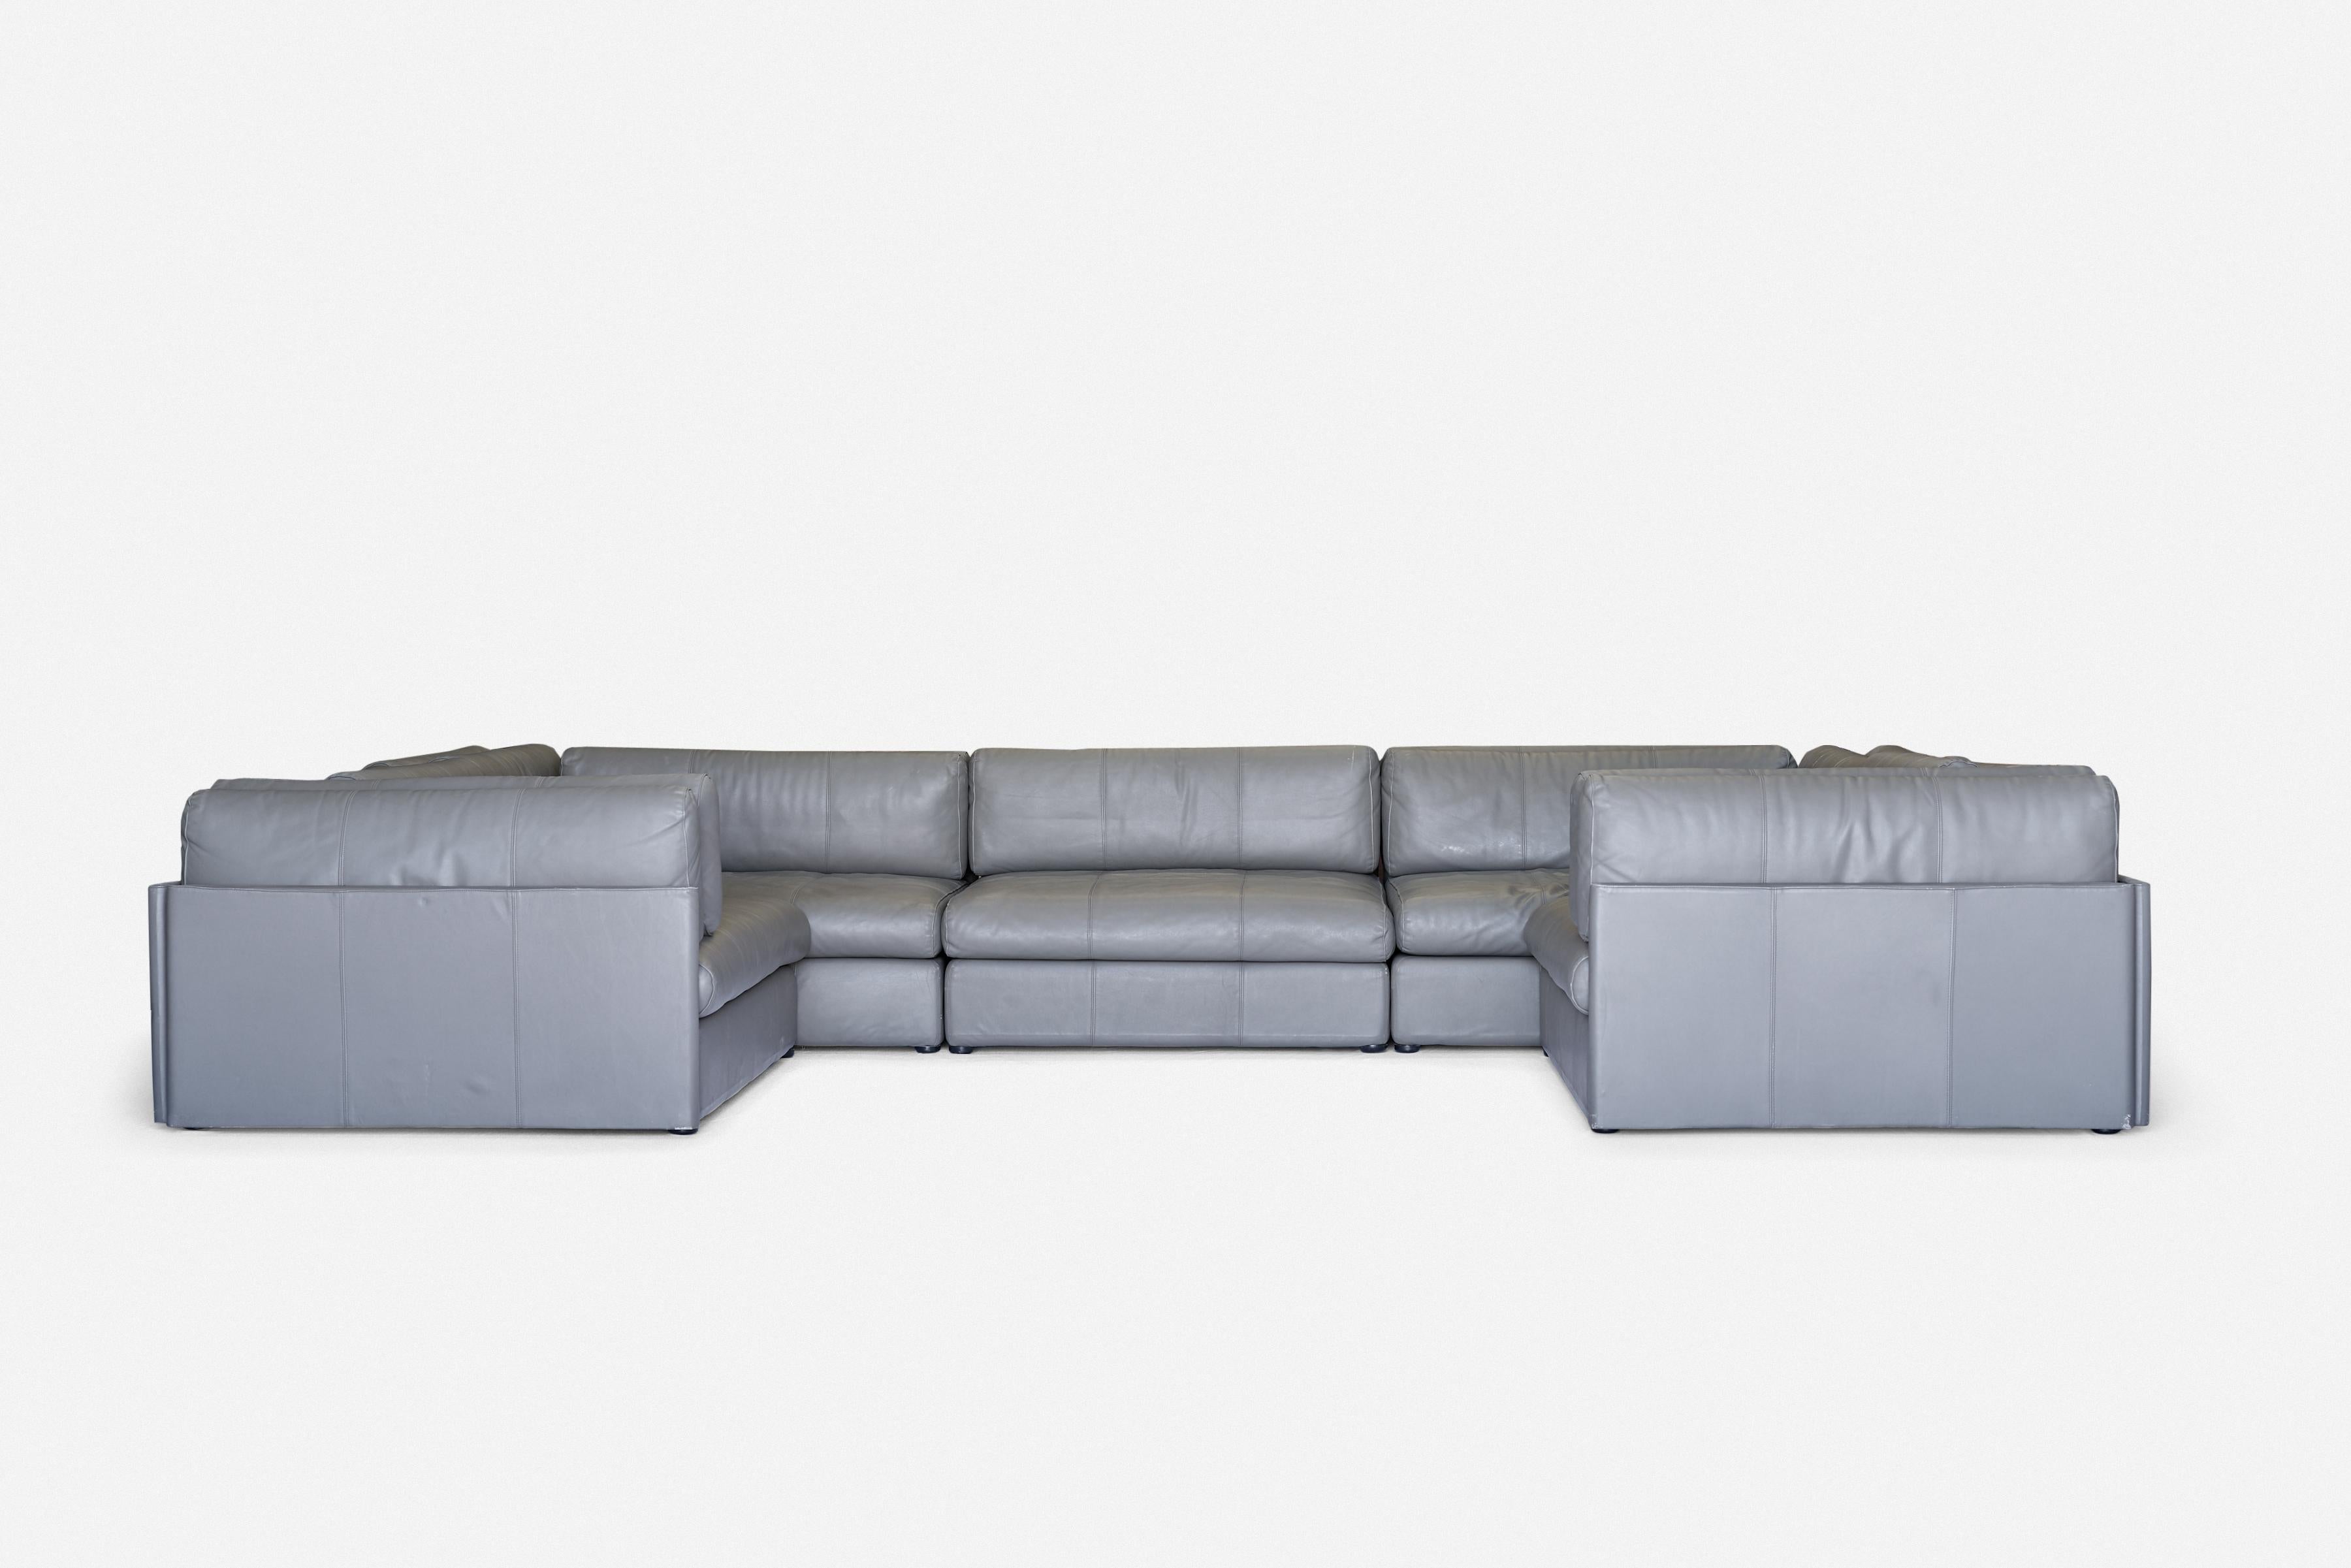 Afra & Tobia Scarpa

Elogia modular sofa
B & B Italia
Italy, 1985
leather, wood, glides


This model was in production for a short time and has not been made in over 30 years. Dimensions may vary by arrangement. Each section is 55 inches